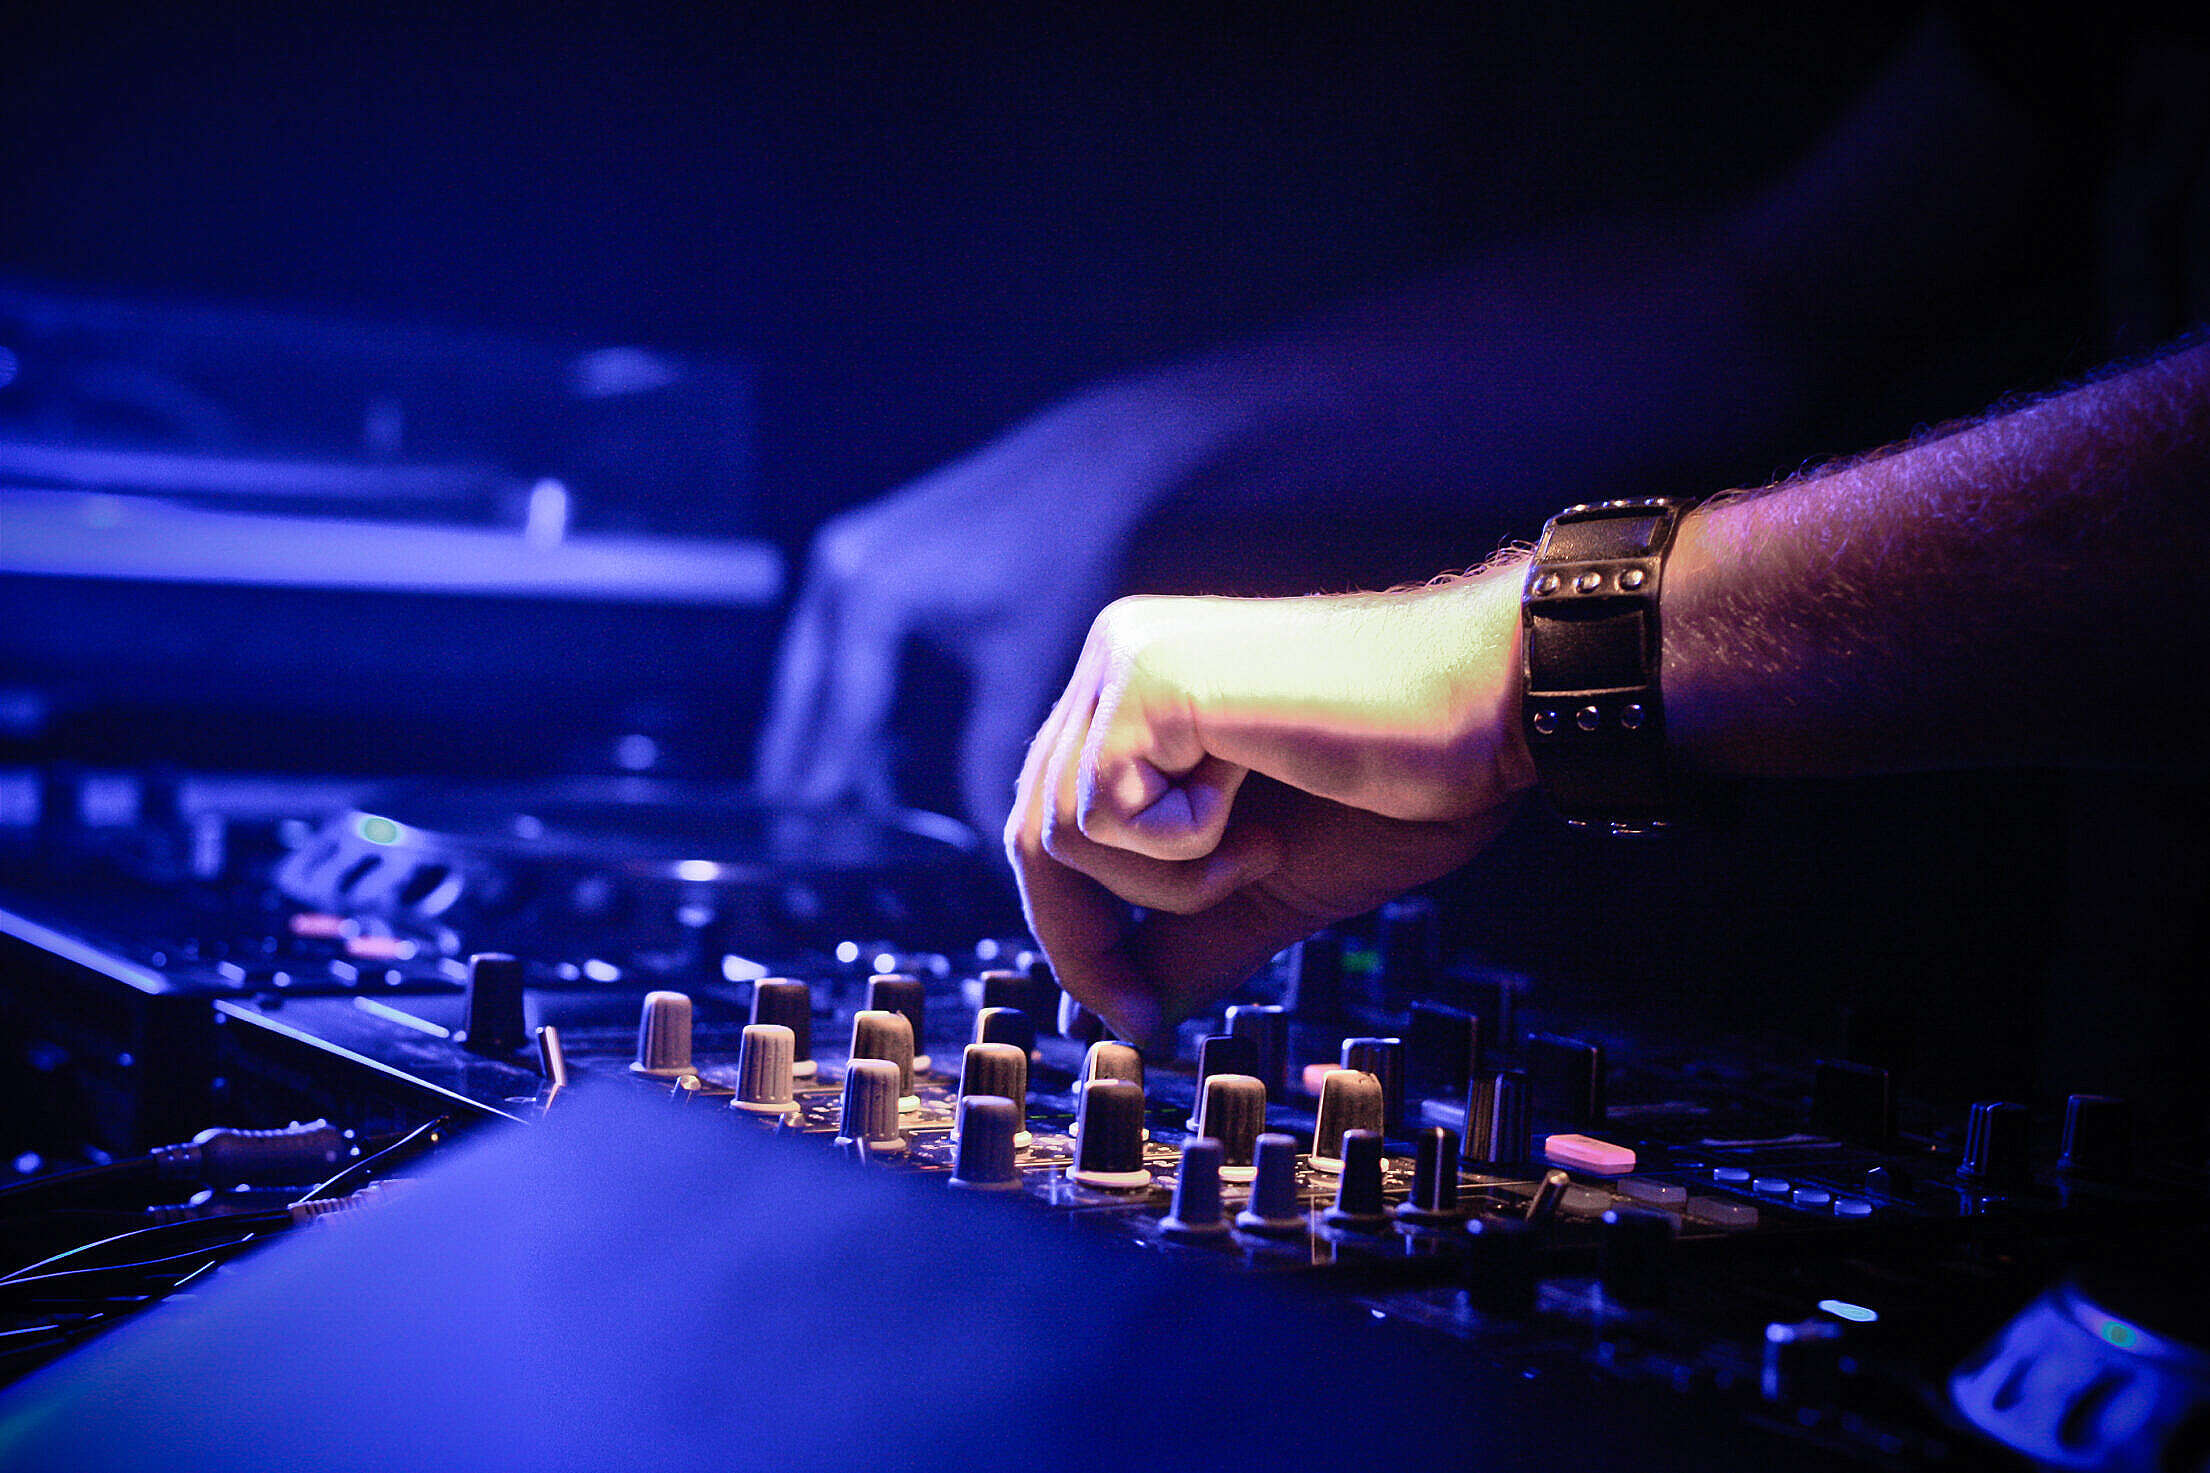 DJ In The Mix Free Stock Photo